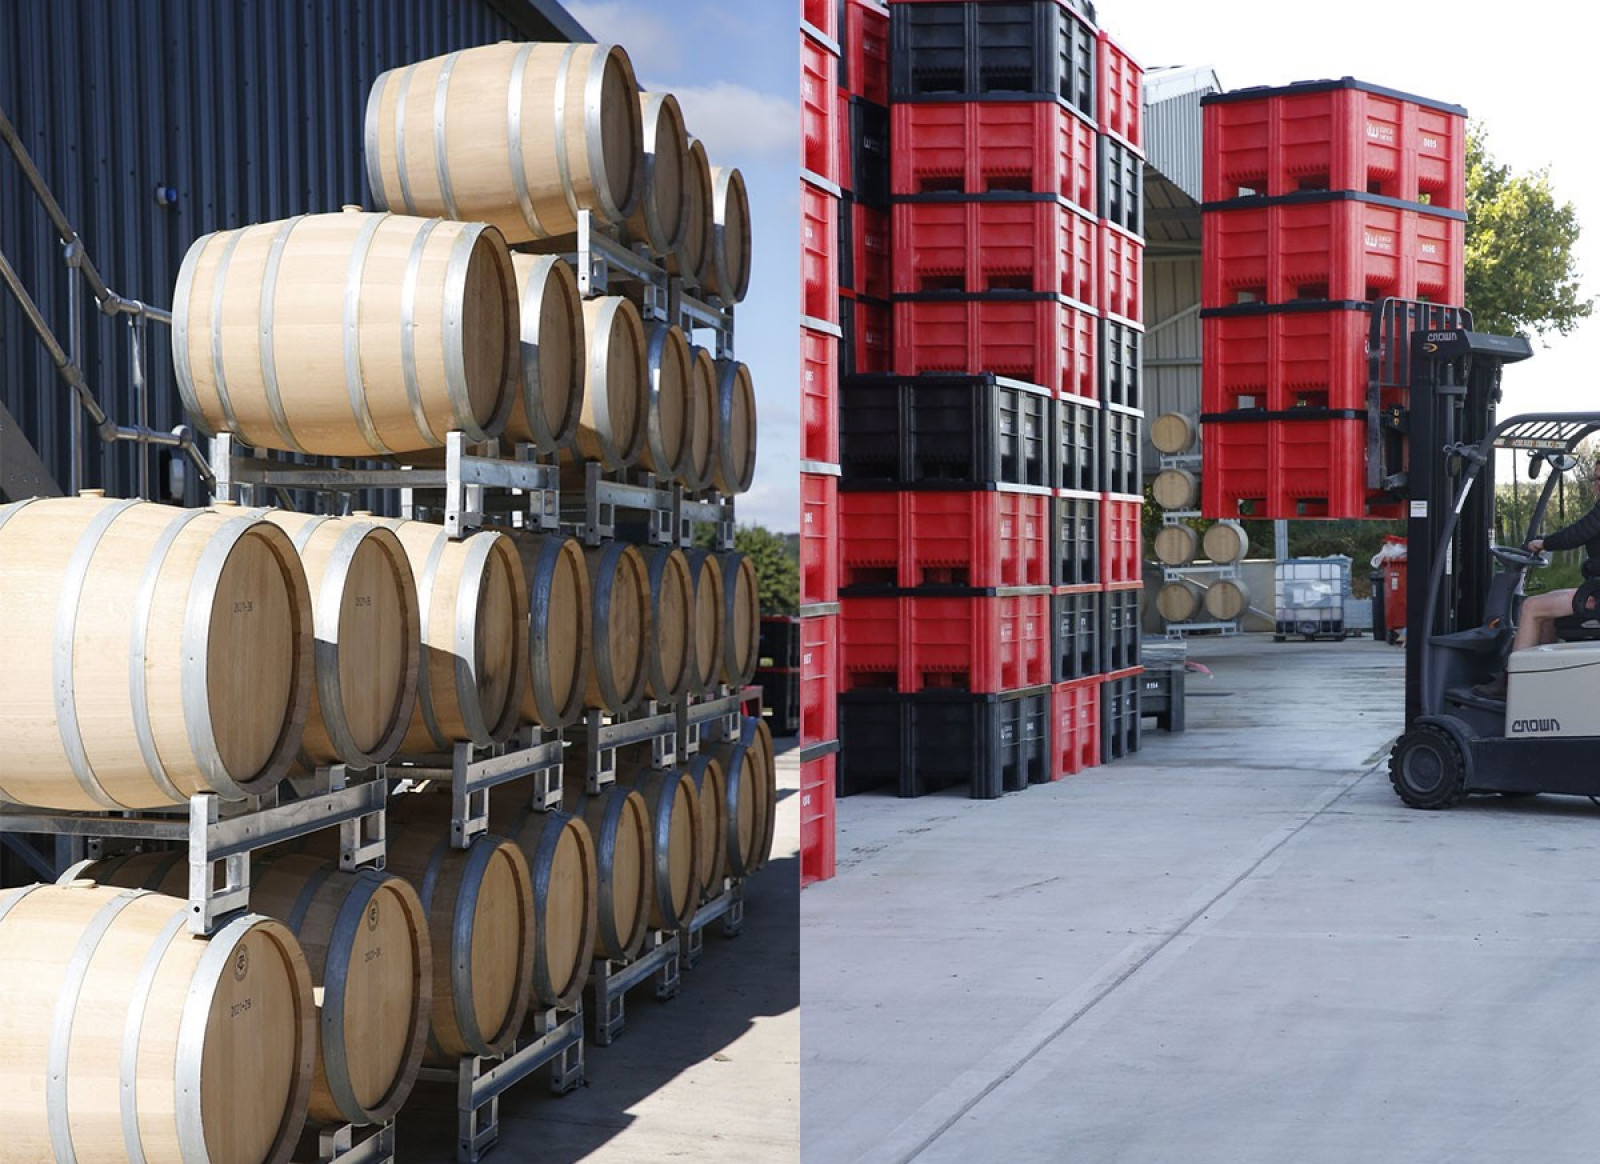 Sustainably sourced English winery supported by Direct Air’s solution